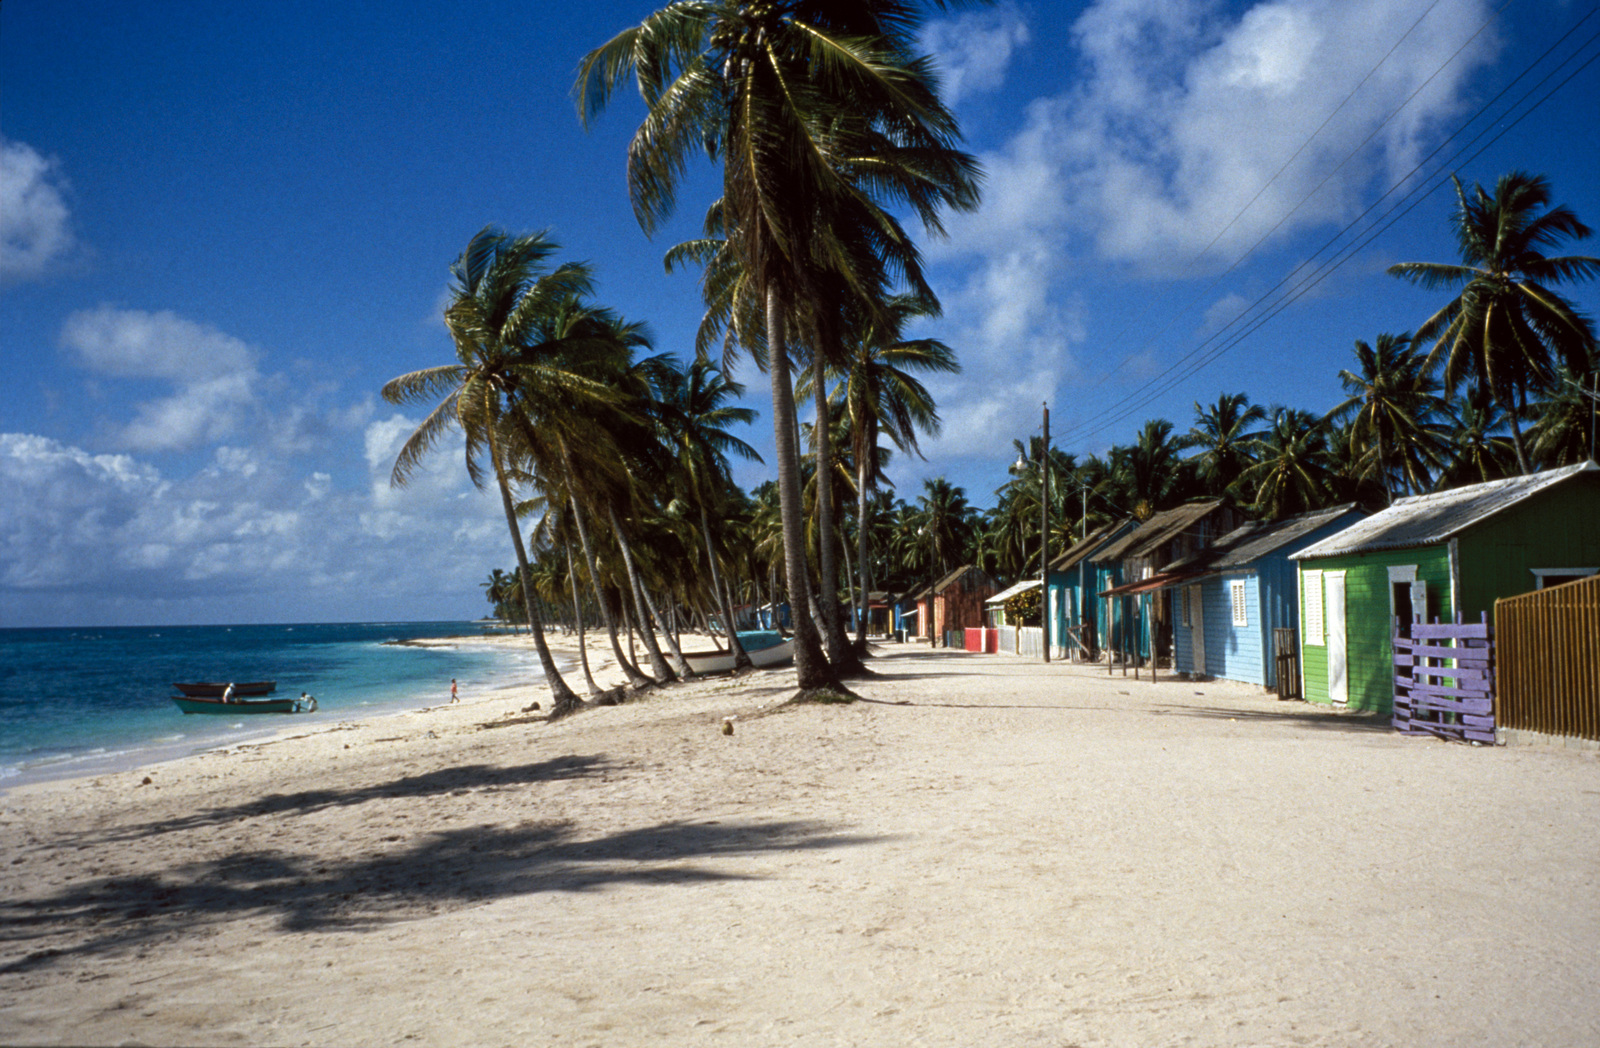 a beach with palm trees and houses